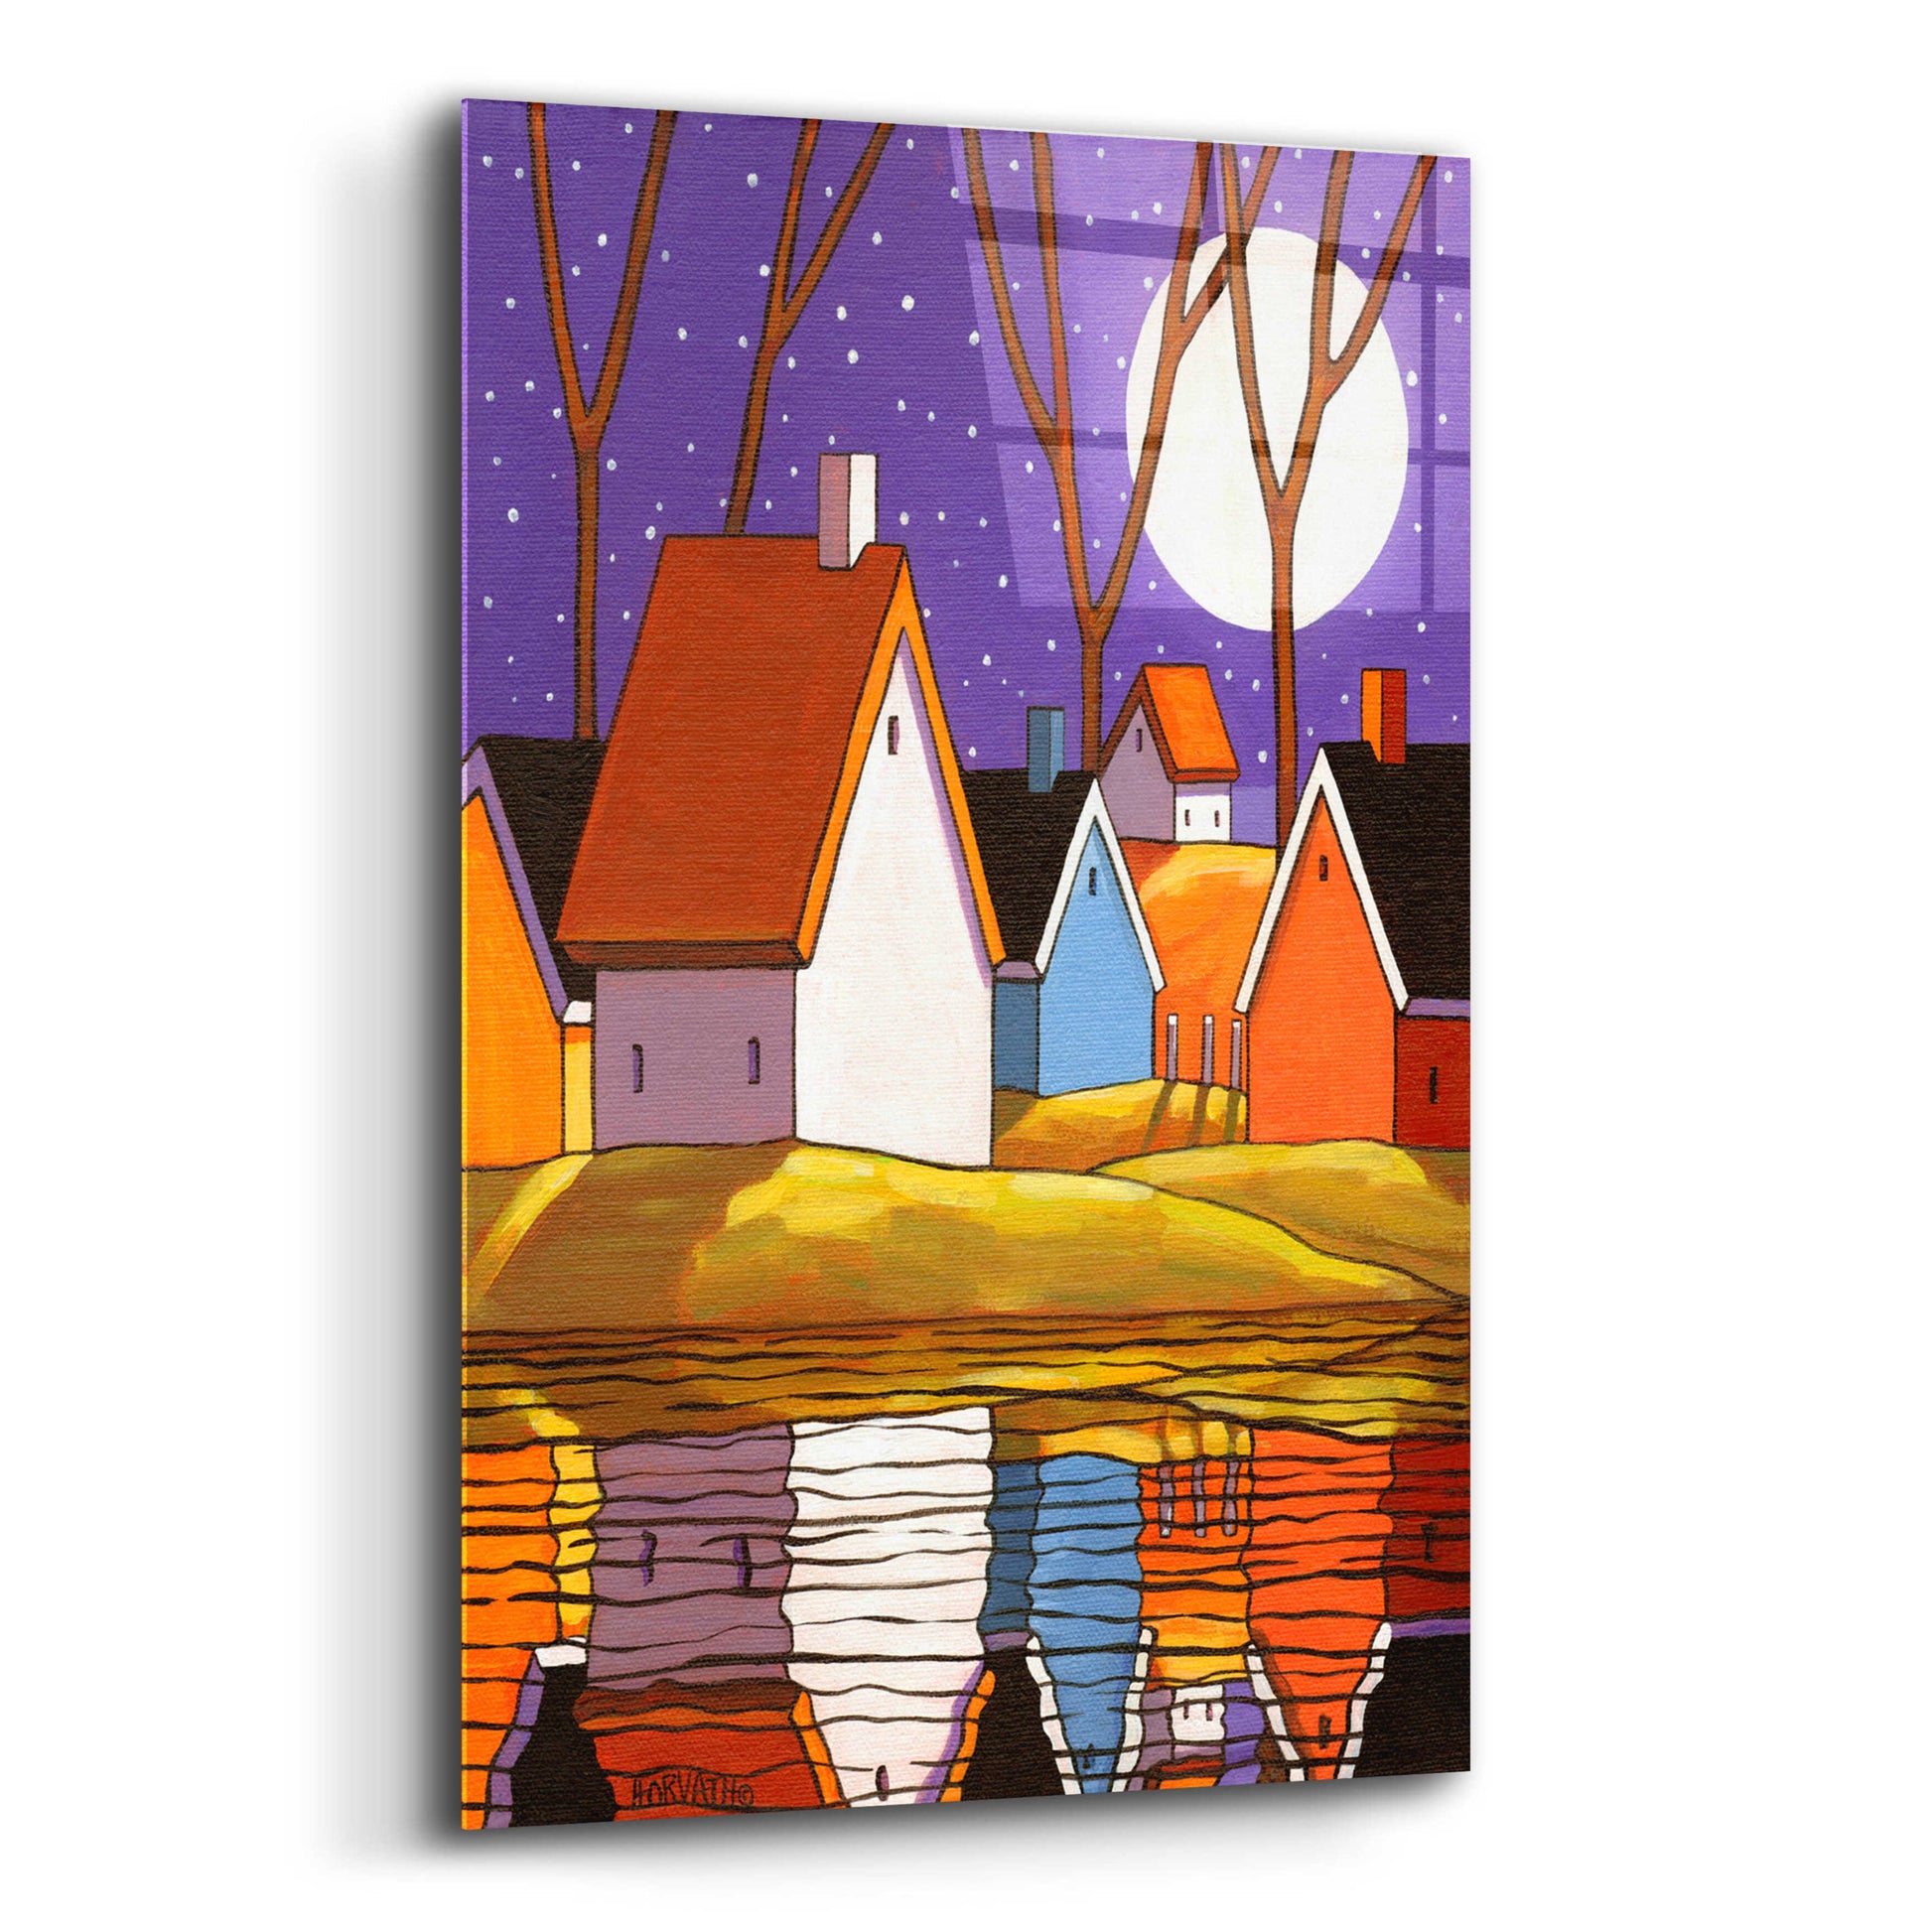 Epic Art 'Purple Sky and Stars Cottages' by Cathy Horvath-Buchanan, Acrylic Glass Wall Art,12x16